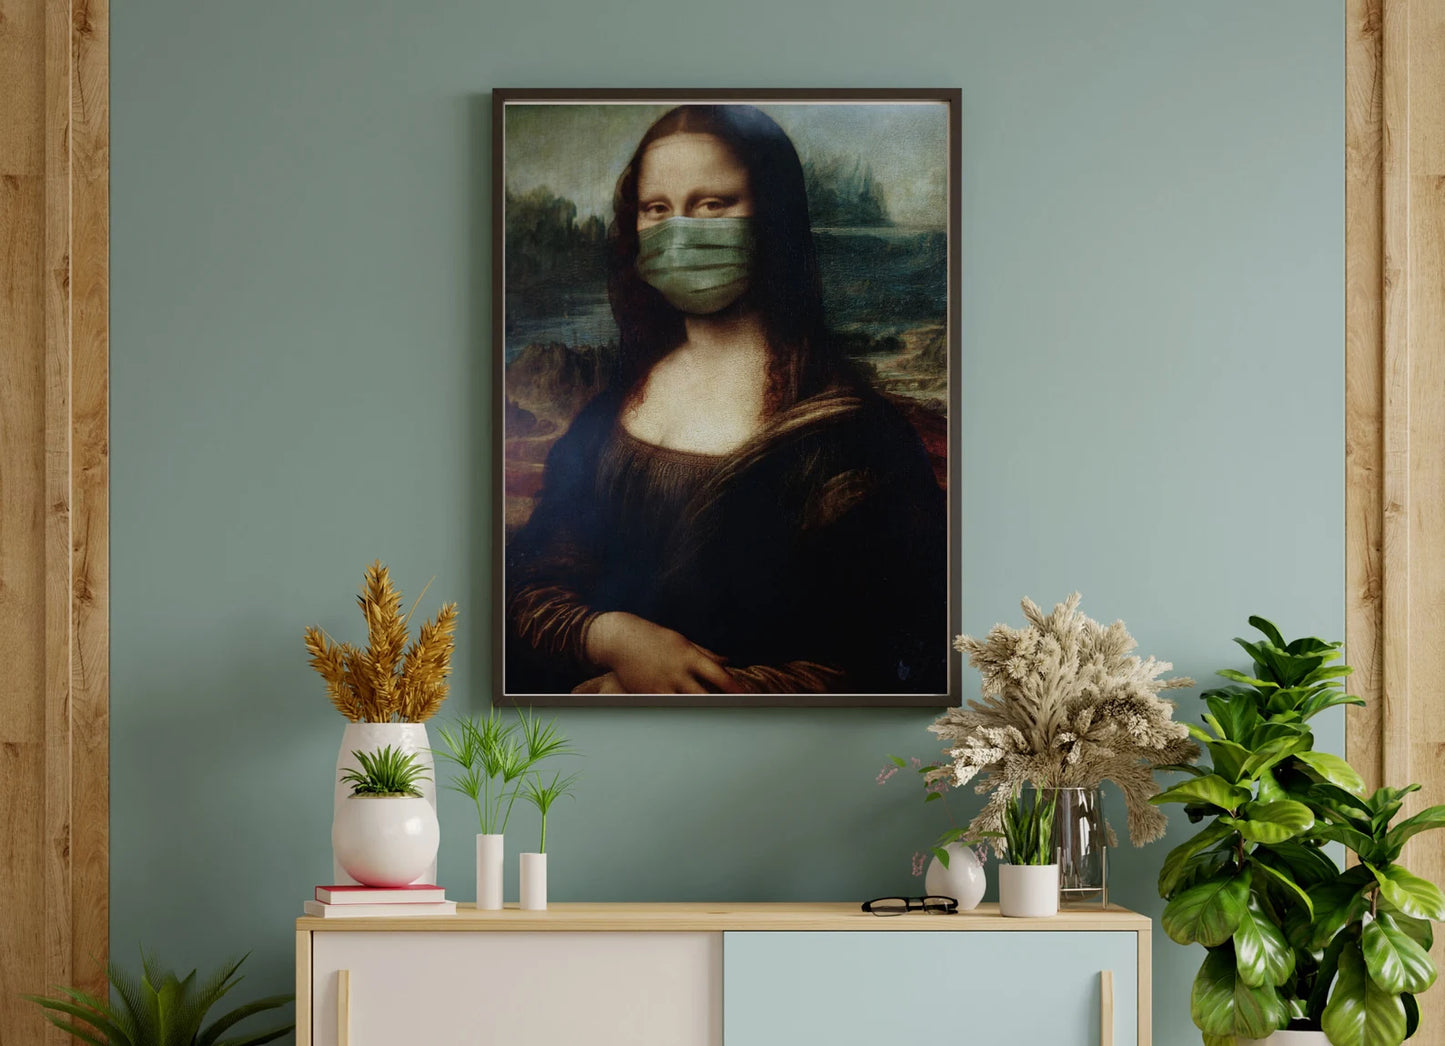 Masked Up Monalisa - Digital Poster for your living room, bedroom, office or entryway